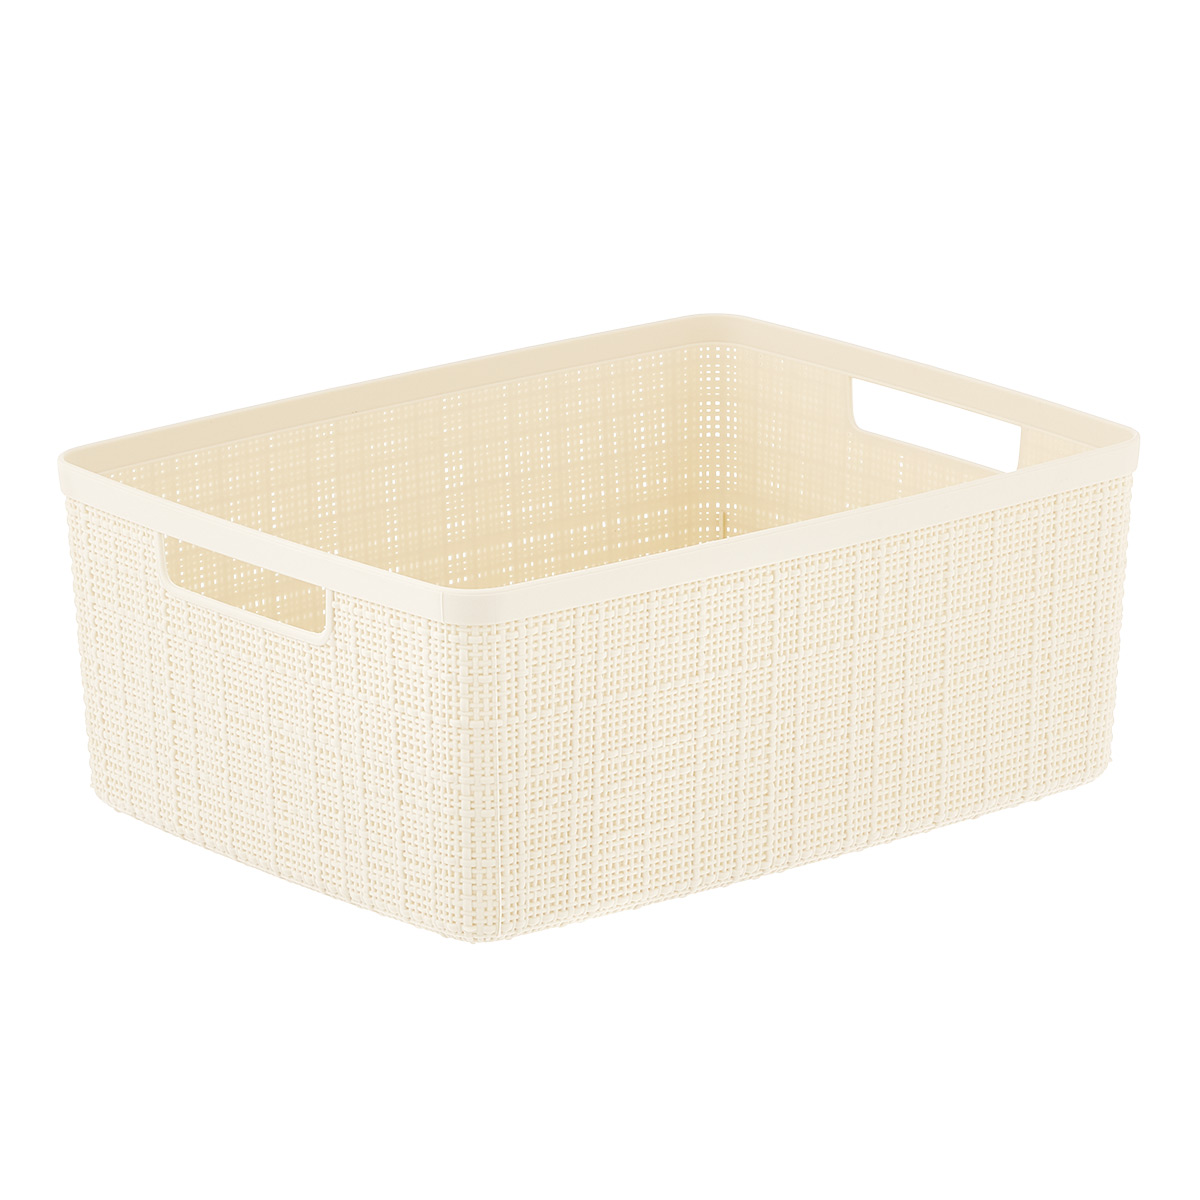 Curver Jute Plastic Basket | The Container Store